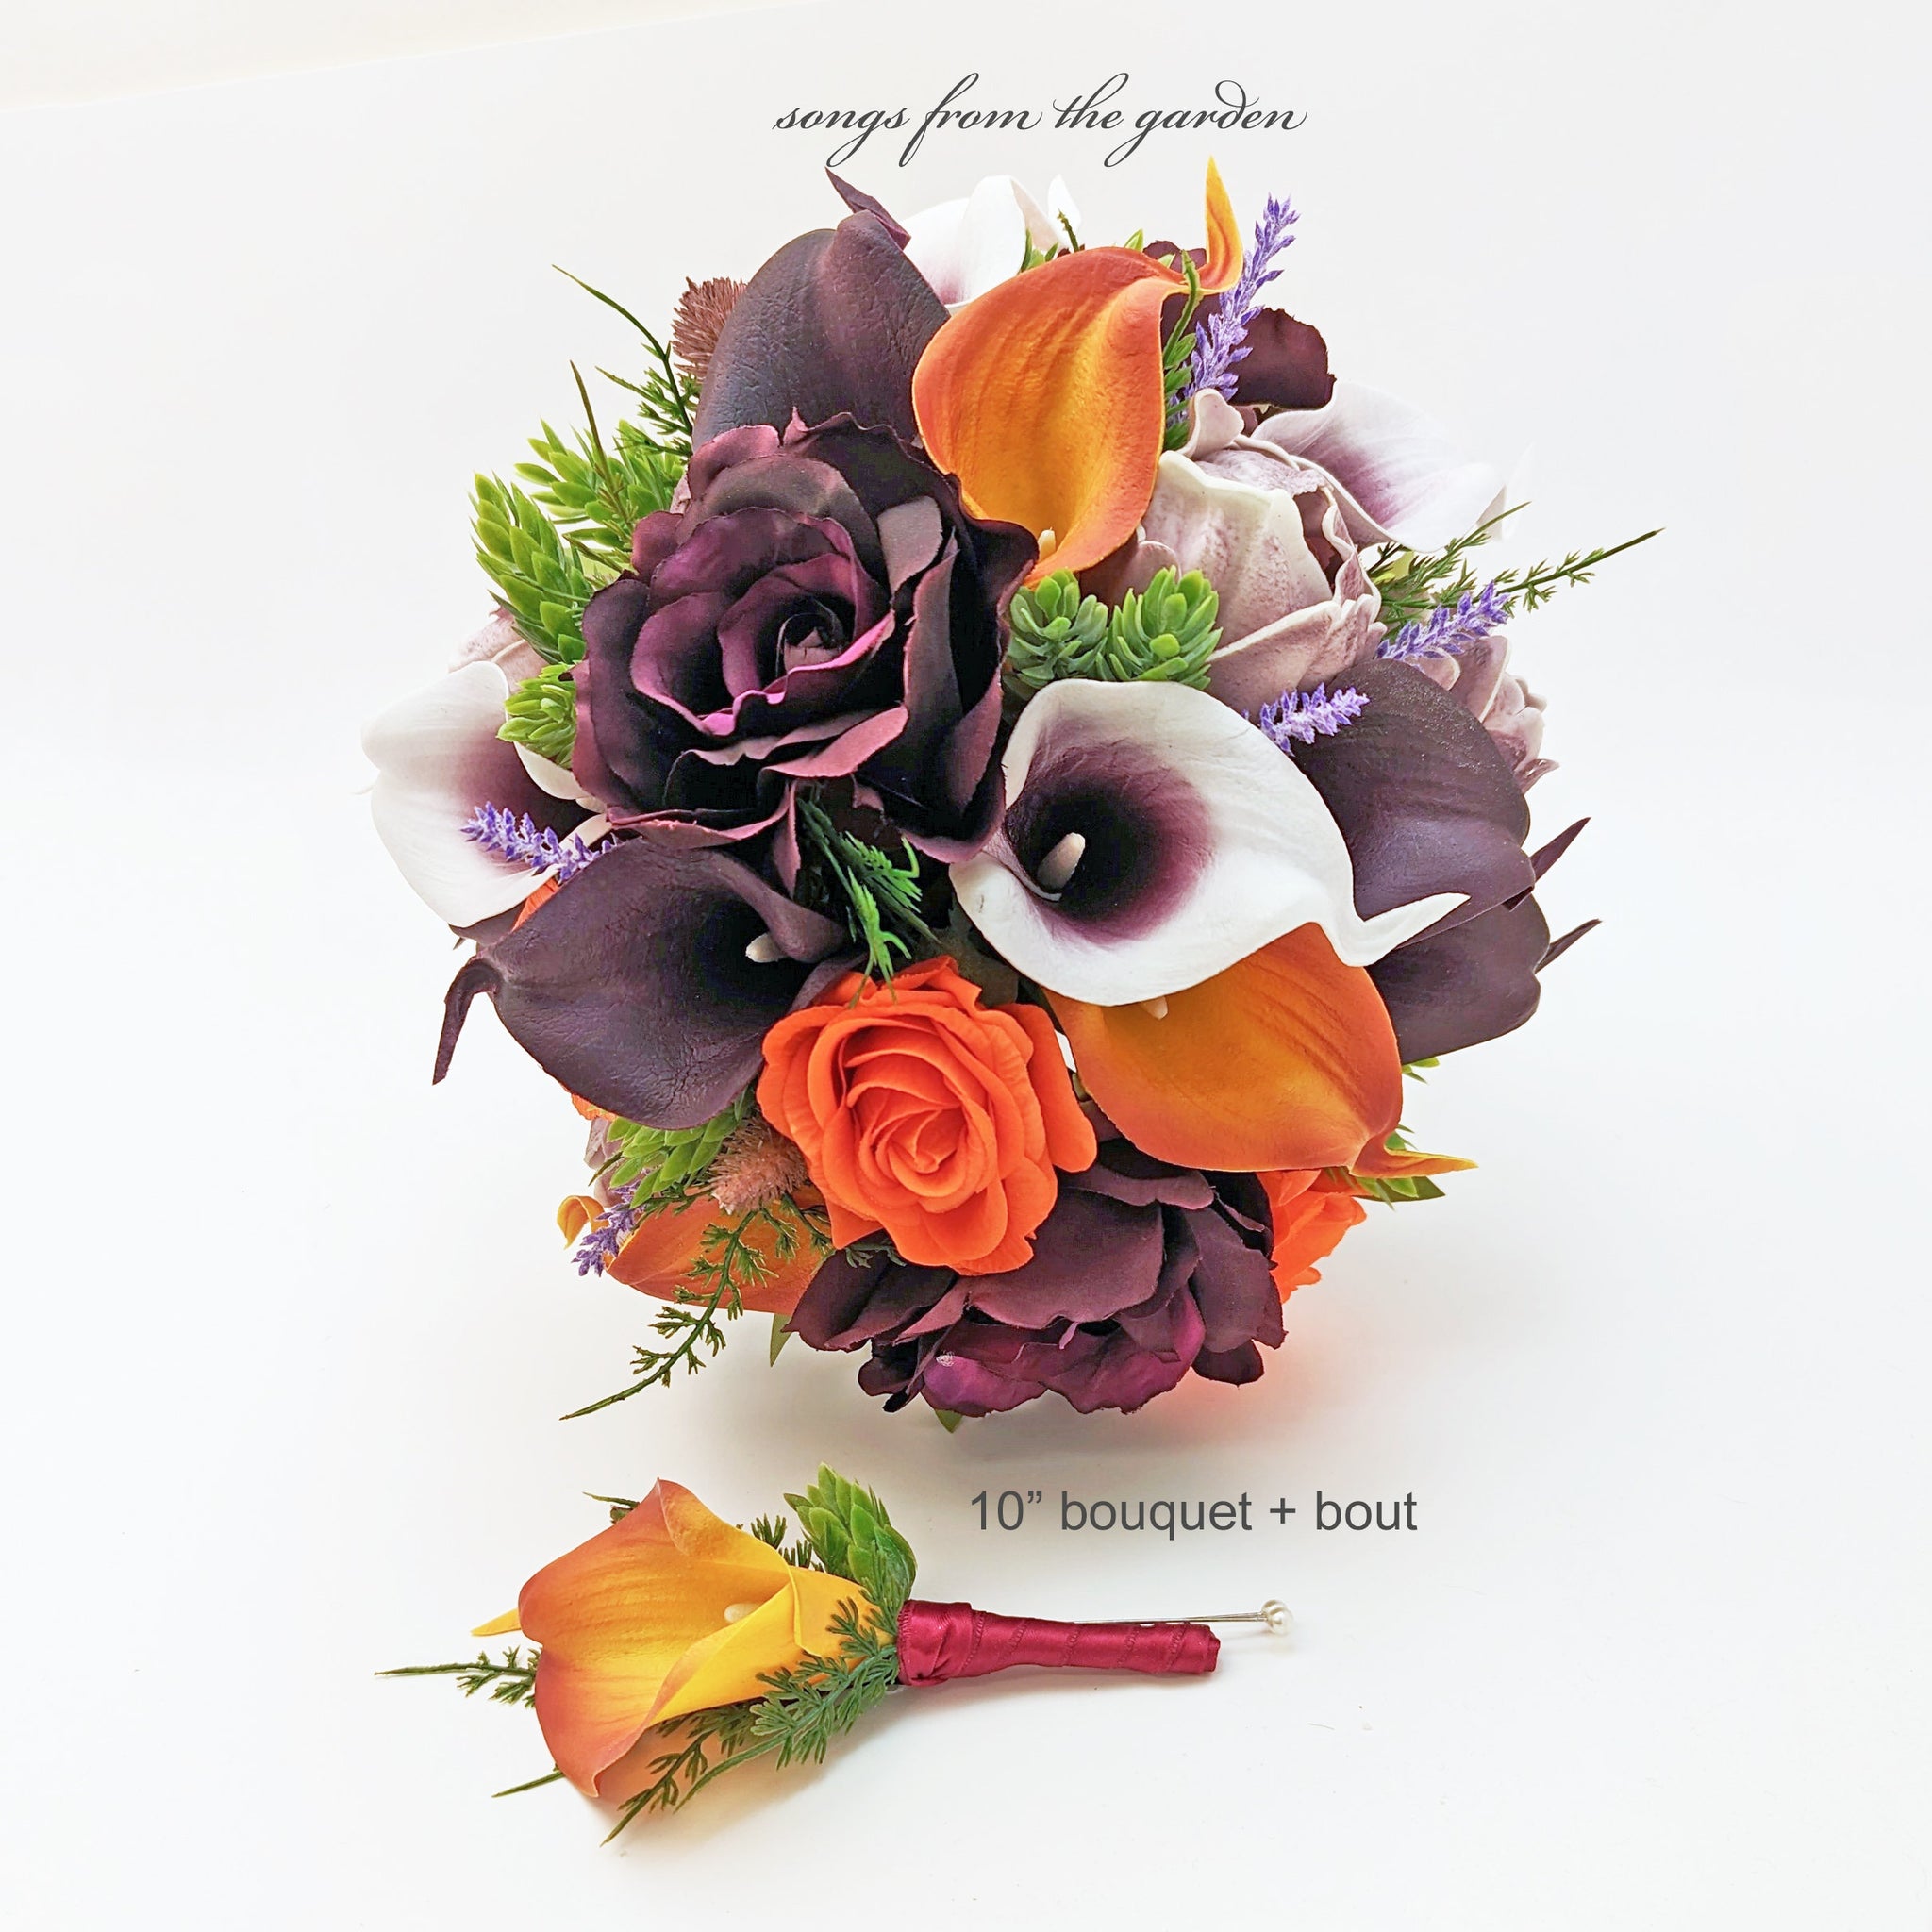 Plum & Orange Bridal or Bridesmaid Bouquet Calla Lilies Roses Peonies Hops - Add Corsage Groom's Boutonniere Wedding Centerpiece and More!